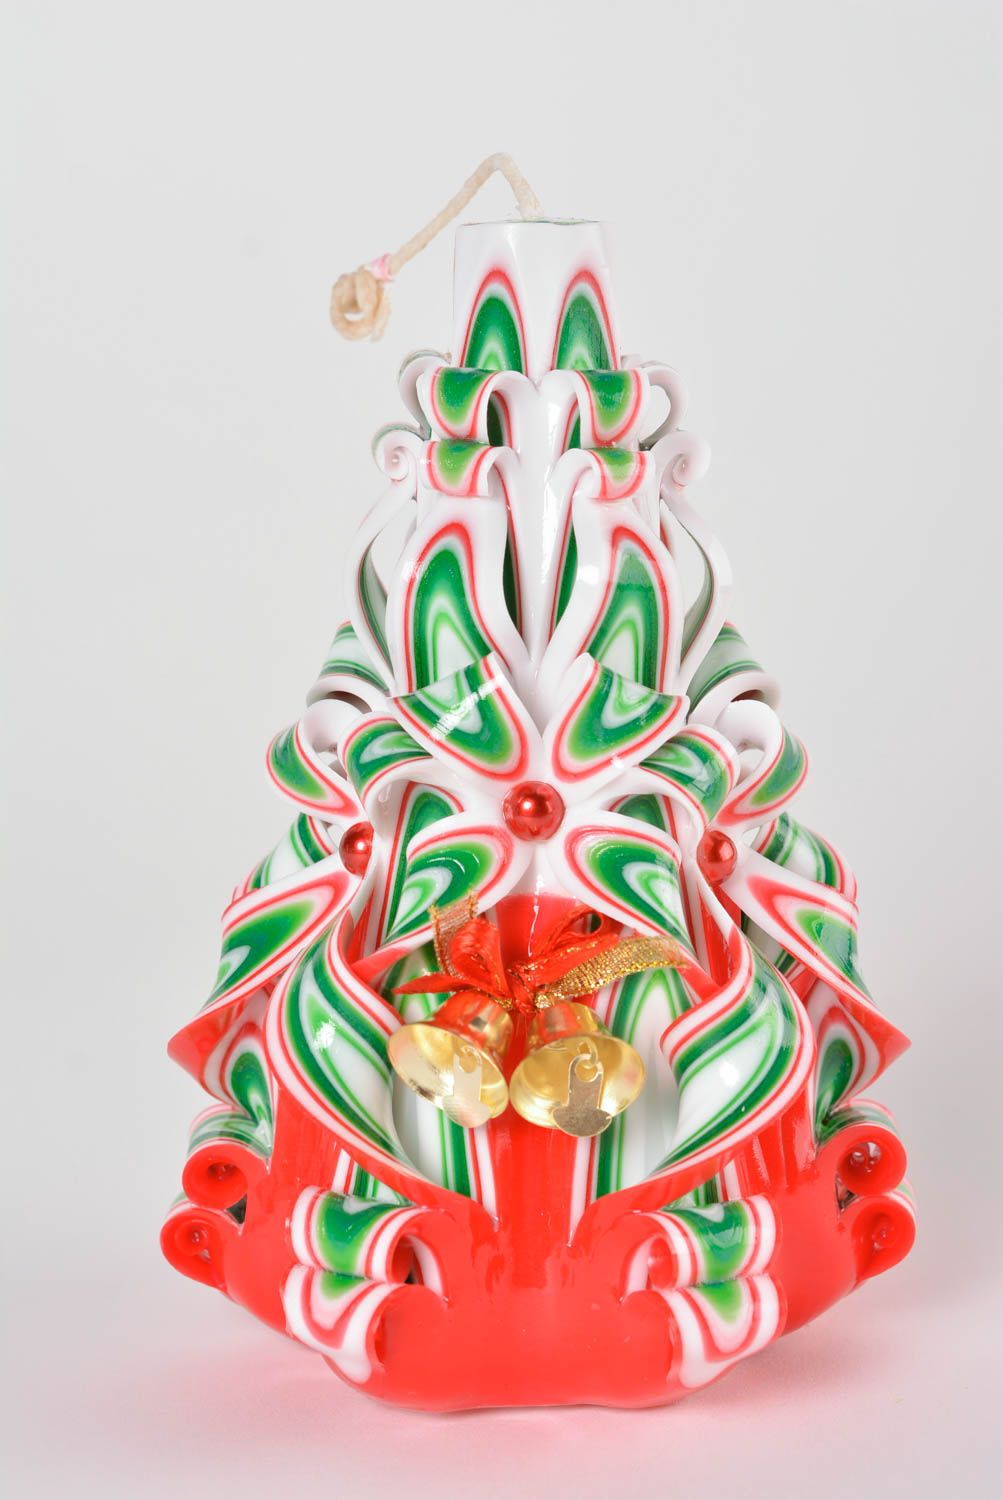 Beautiful handmade candle designs Christmas gifts home design gift ideas photo 1